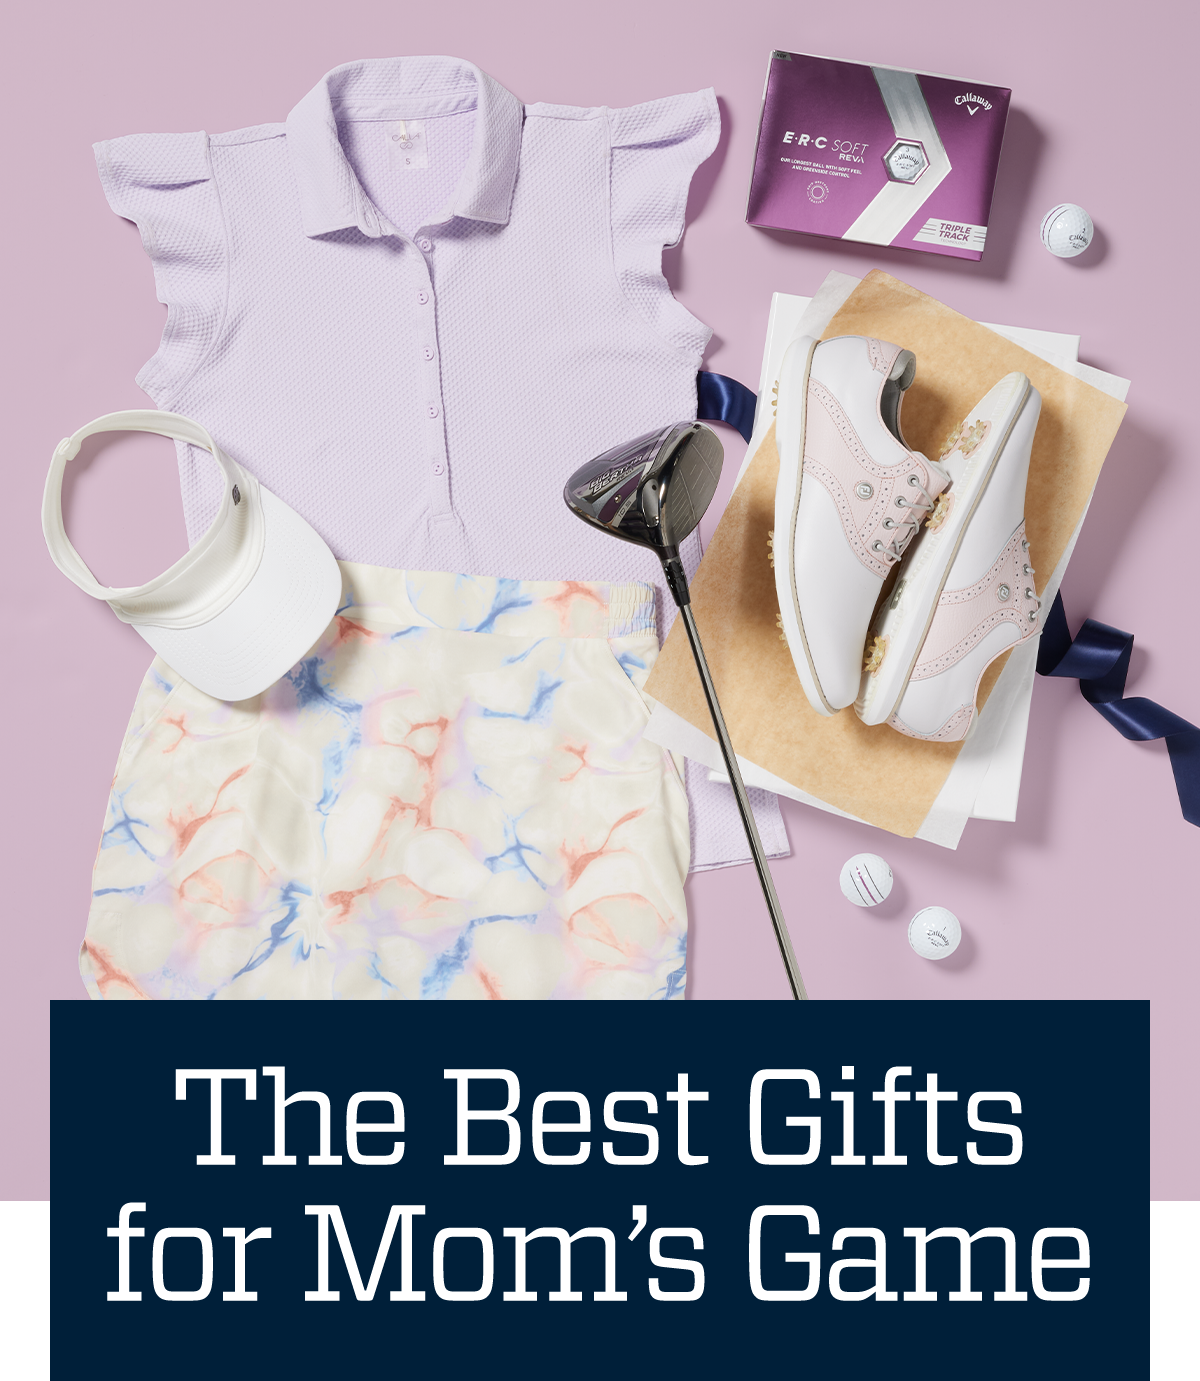  The best gifts for mom's game.